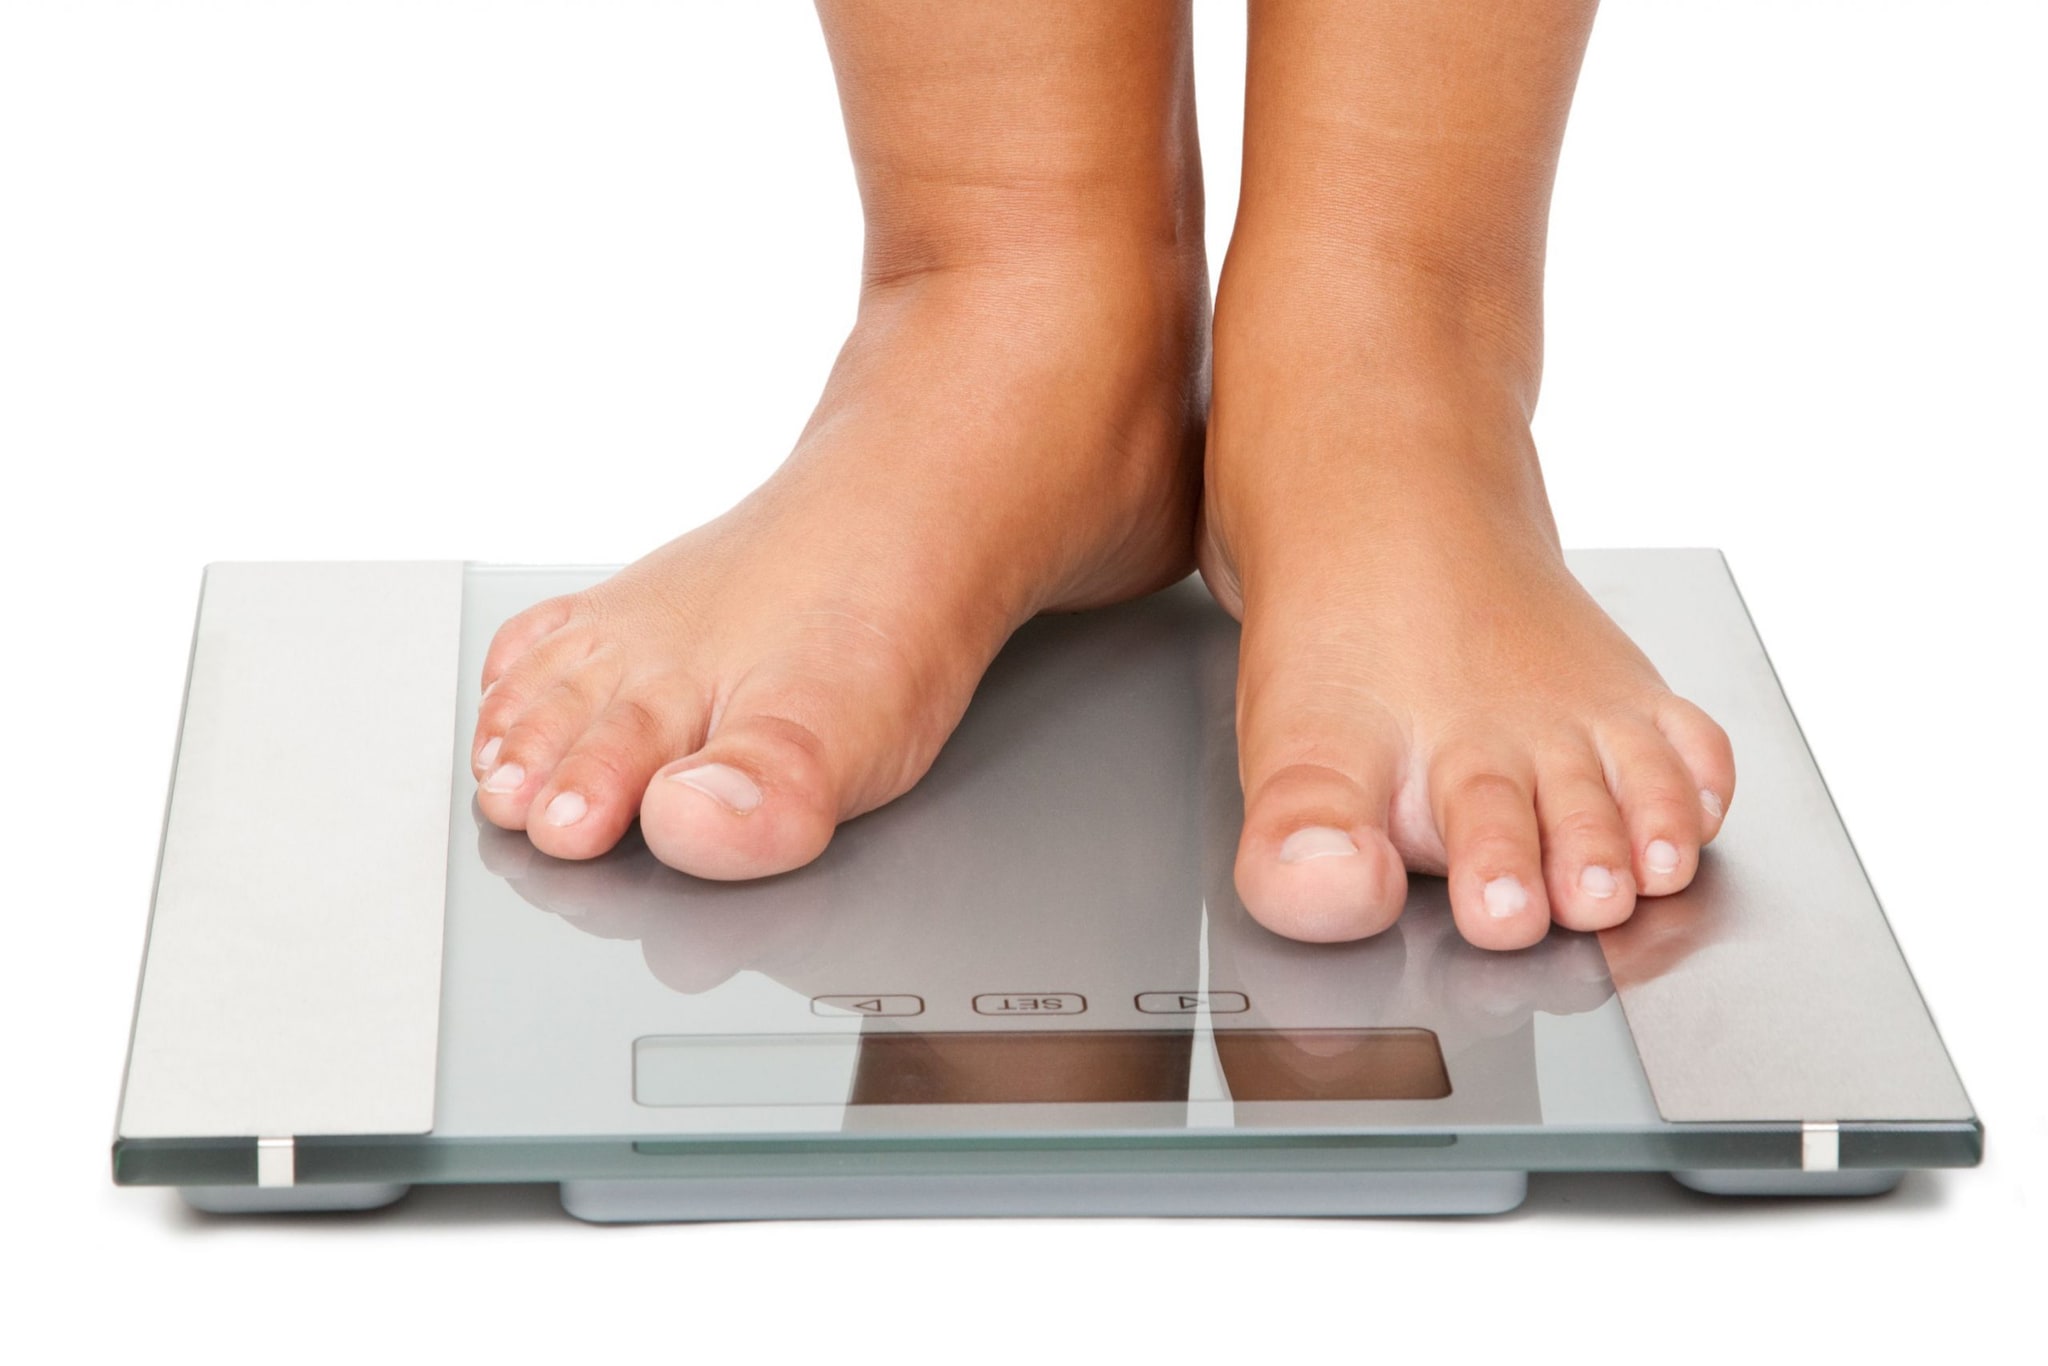 https://www.cdc.gov/healthyweight/spanish/images/assessing/Feet-on-scales.jpg?_=56608